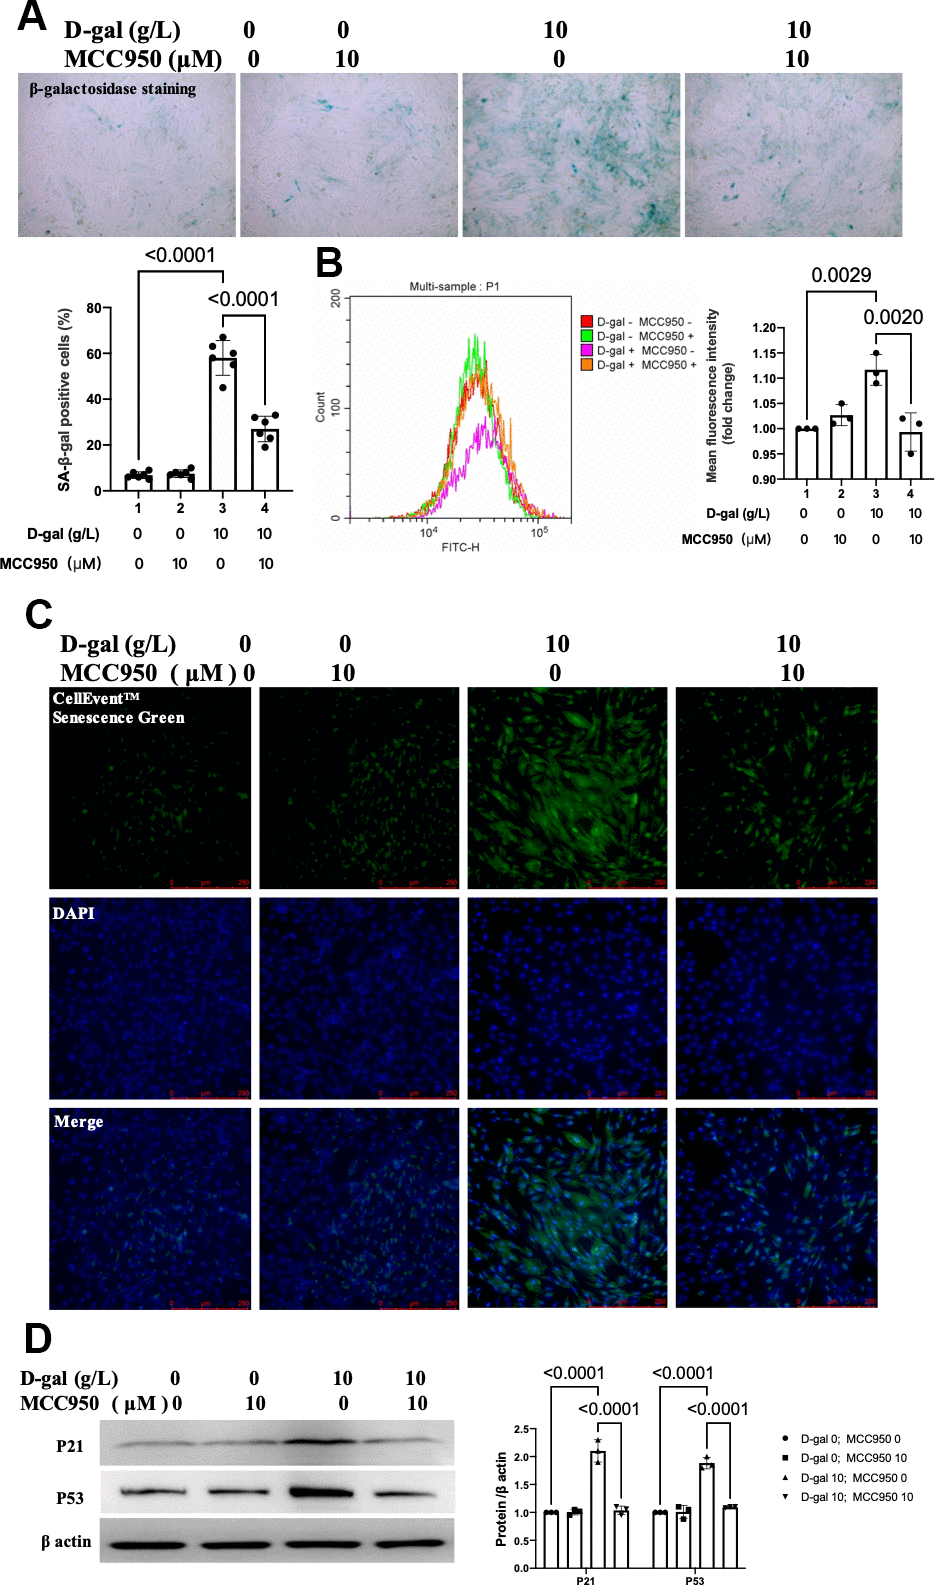 Inhibition of NLRP3 by MCC950 attenuated cardiocytes aging induced by D-gal in H9c2 cells. H9c2 cells were pre-treated with or without MCC950 (10μM), a commonly used NLRP3 inhibitor, for 1 hour, and then incubated with or without 10g/L D-gal for 24 hours. (A) Representative bright-field photomicrographs showed that MCC950 treatment decreased the percentage of cells expressing β-galactosidase. (B) Flow cytometry analysis was applied to detect the β-galactosidase mean fluorescence intensity after the MCC950 treatment. (C) The CellEvent™ Senescence Green staining showed that MCC950 treatment decreased the senescence-associated β-galactosidase expression induced by D-gal. (D) The aging-associated proteins (P53, P21) were detected by western blot, and the corresponding quantification was present.